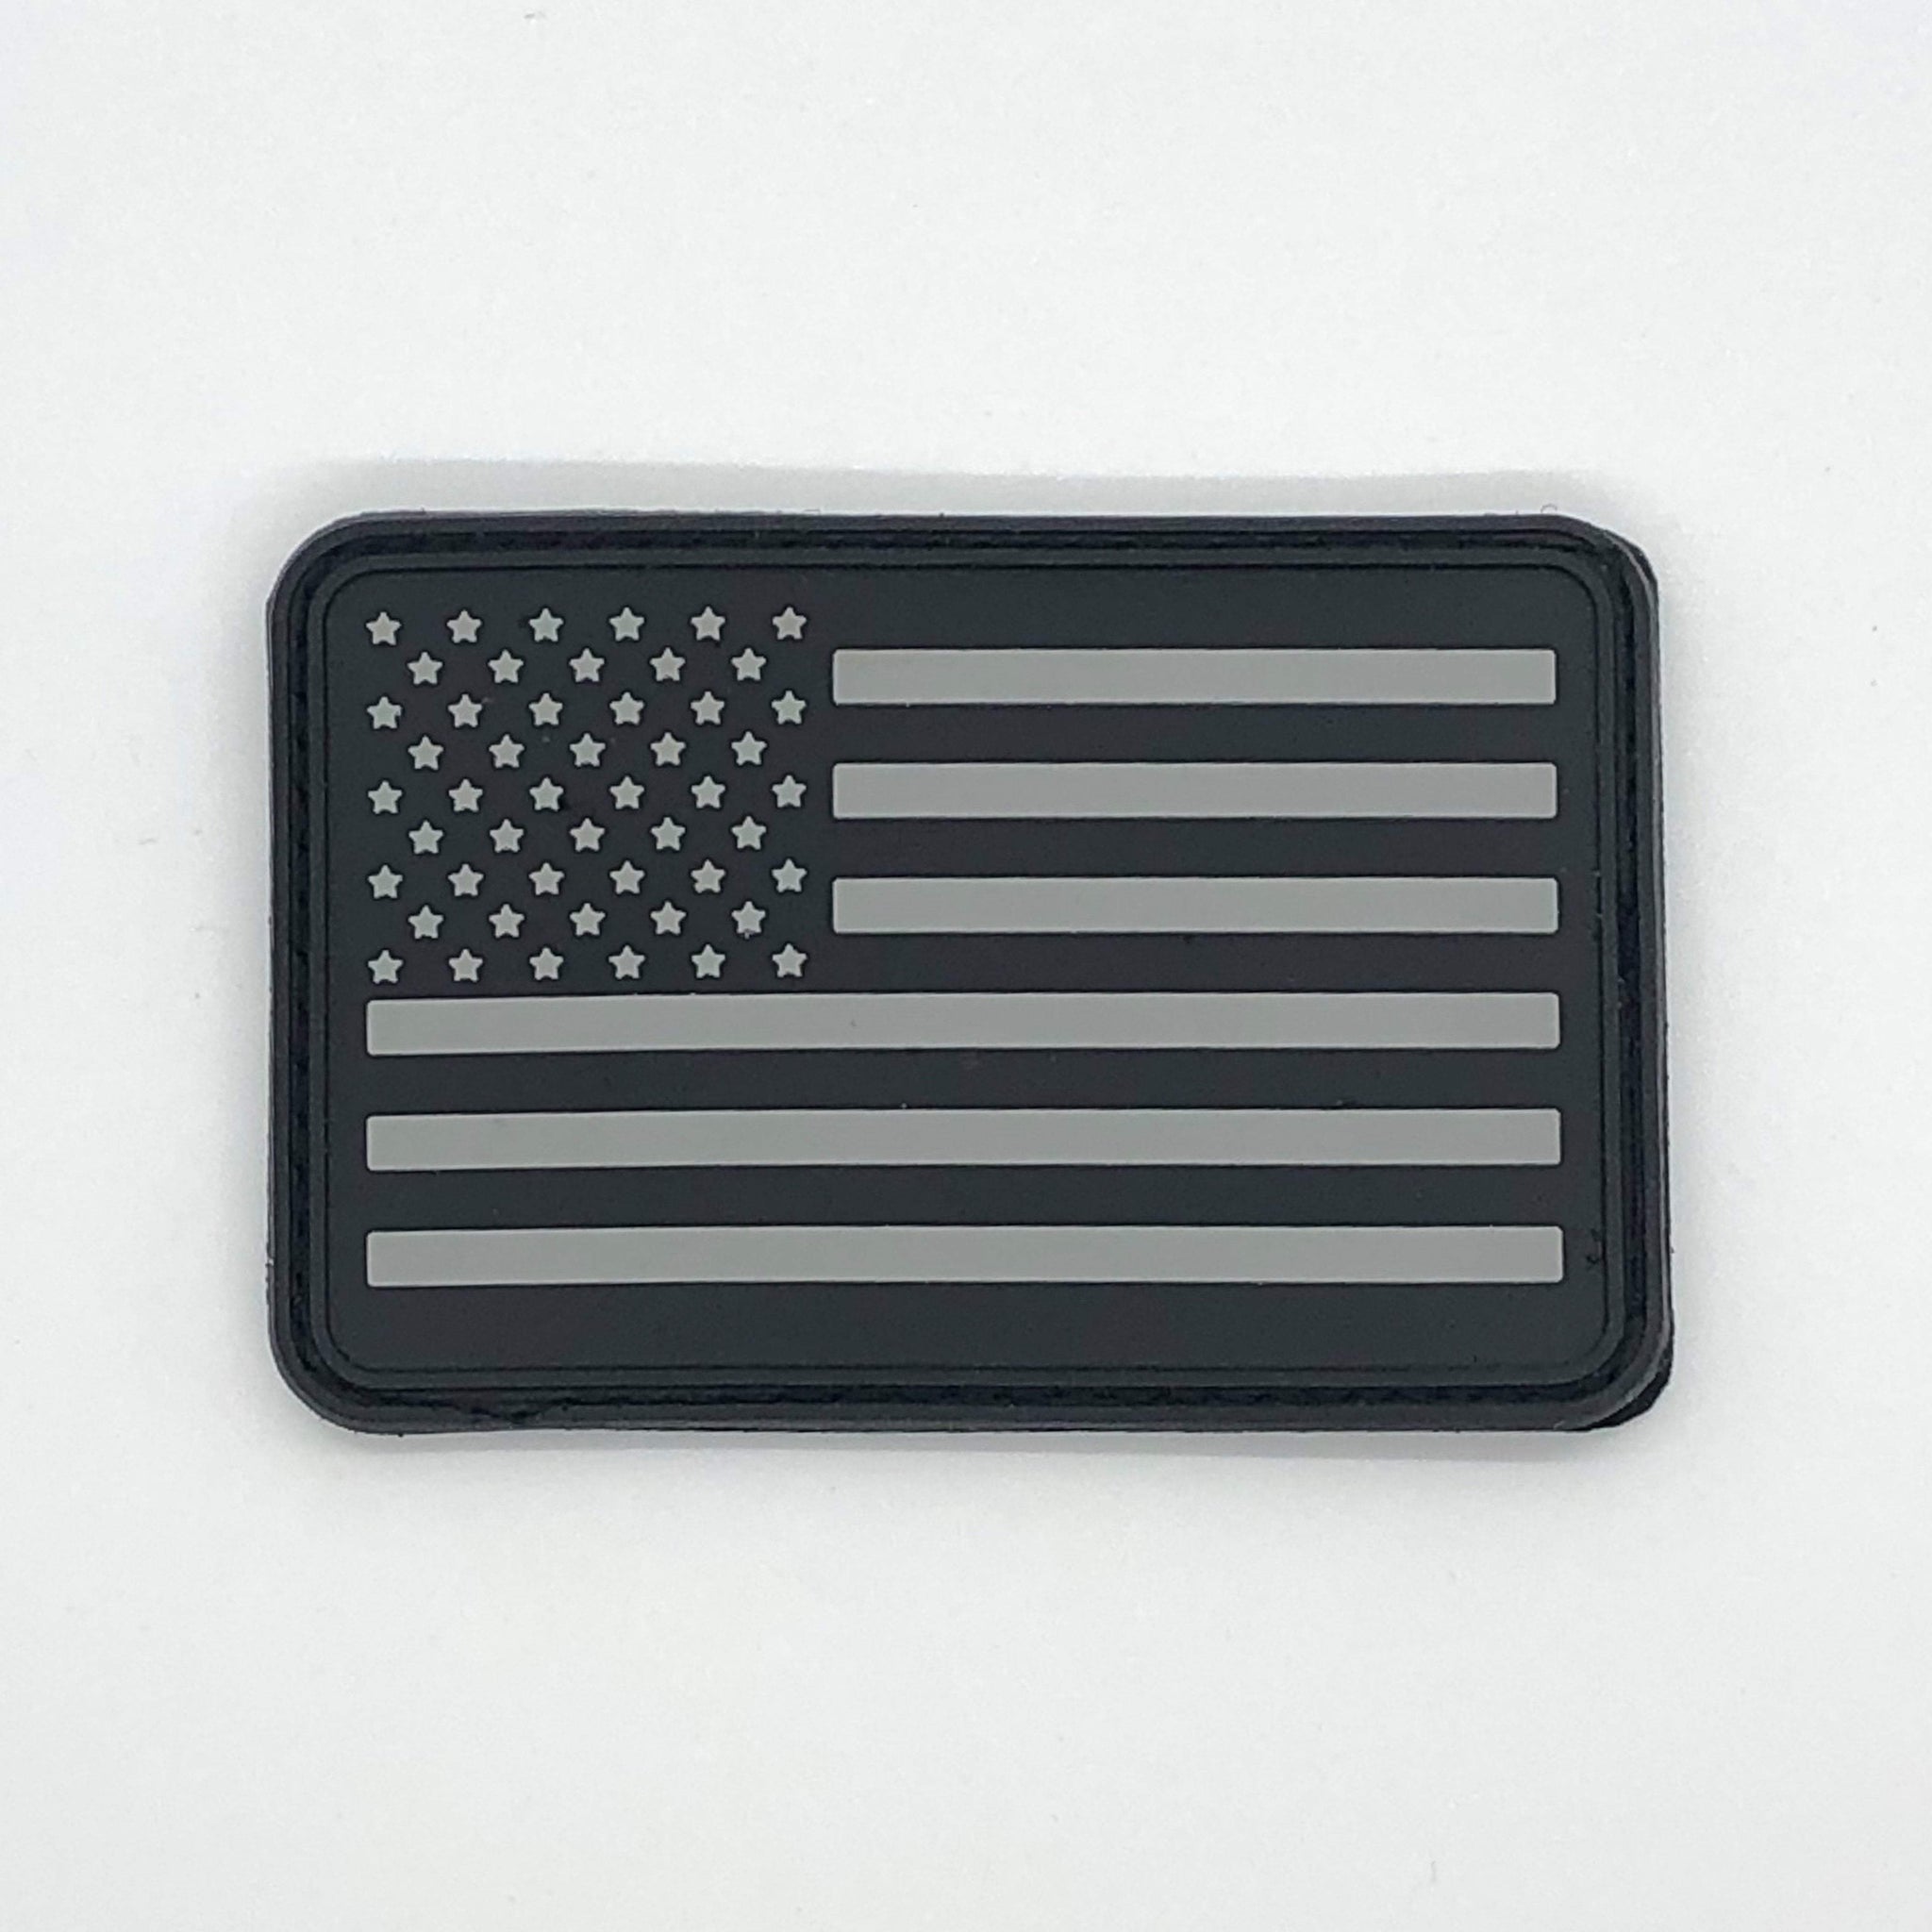 American Flag Patches, Choose Style, PVC Rubber, 2 x 3 w/ Velcro